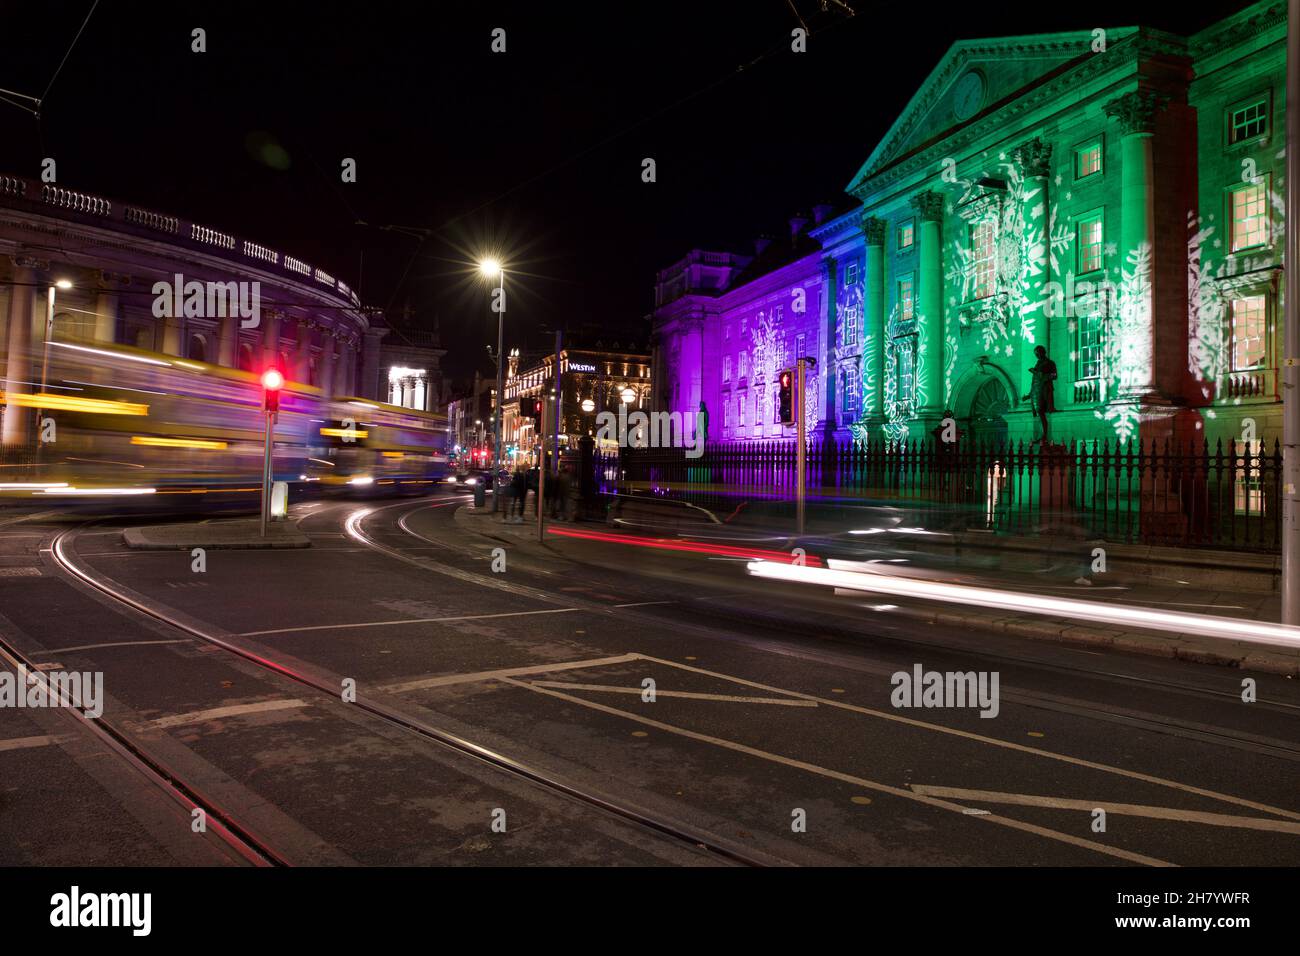 Dublin, Ireland - November 24, 2021: traffic light trails at College Green. Trinity College Dublin can be seen on the right, illuminated with a festiv Stock Photo